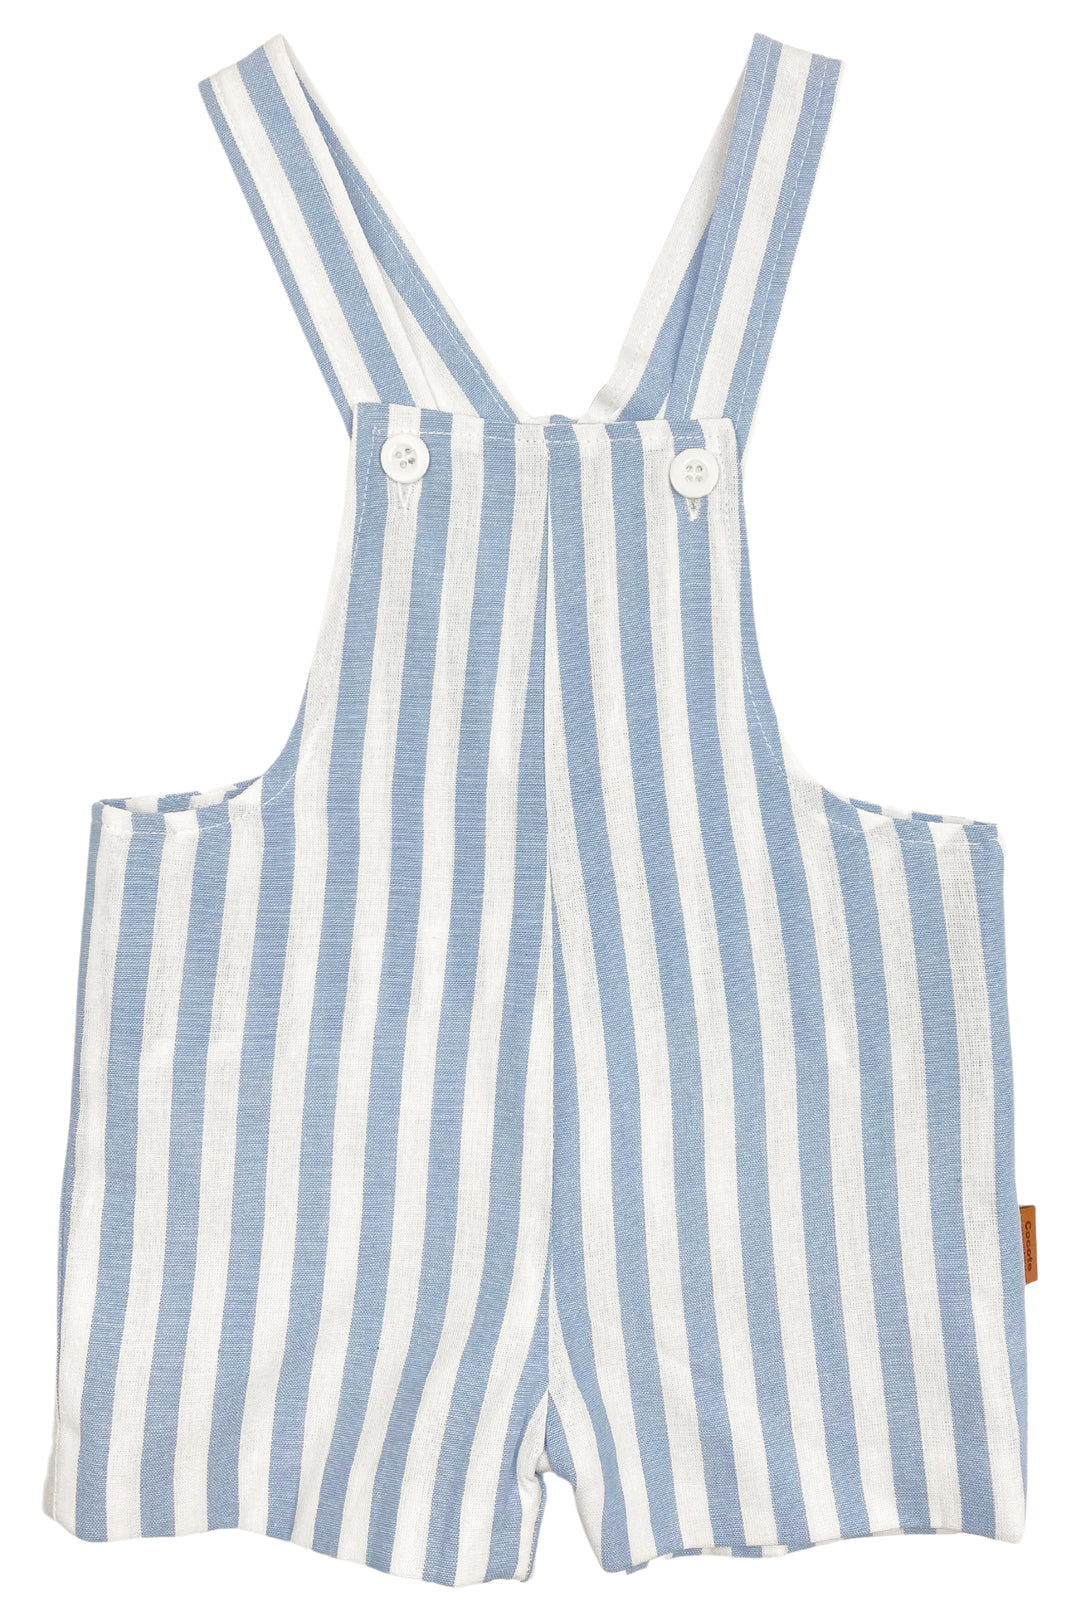 Cocote "Lawrence" Striped Dungarees | Millie and John